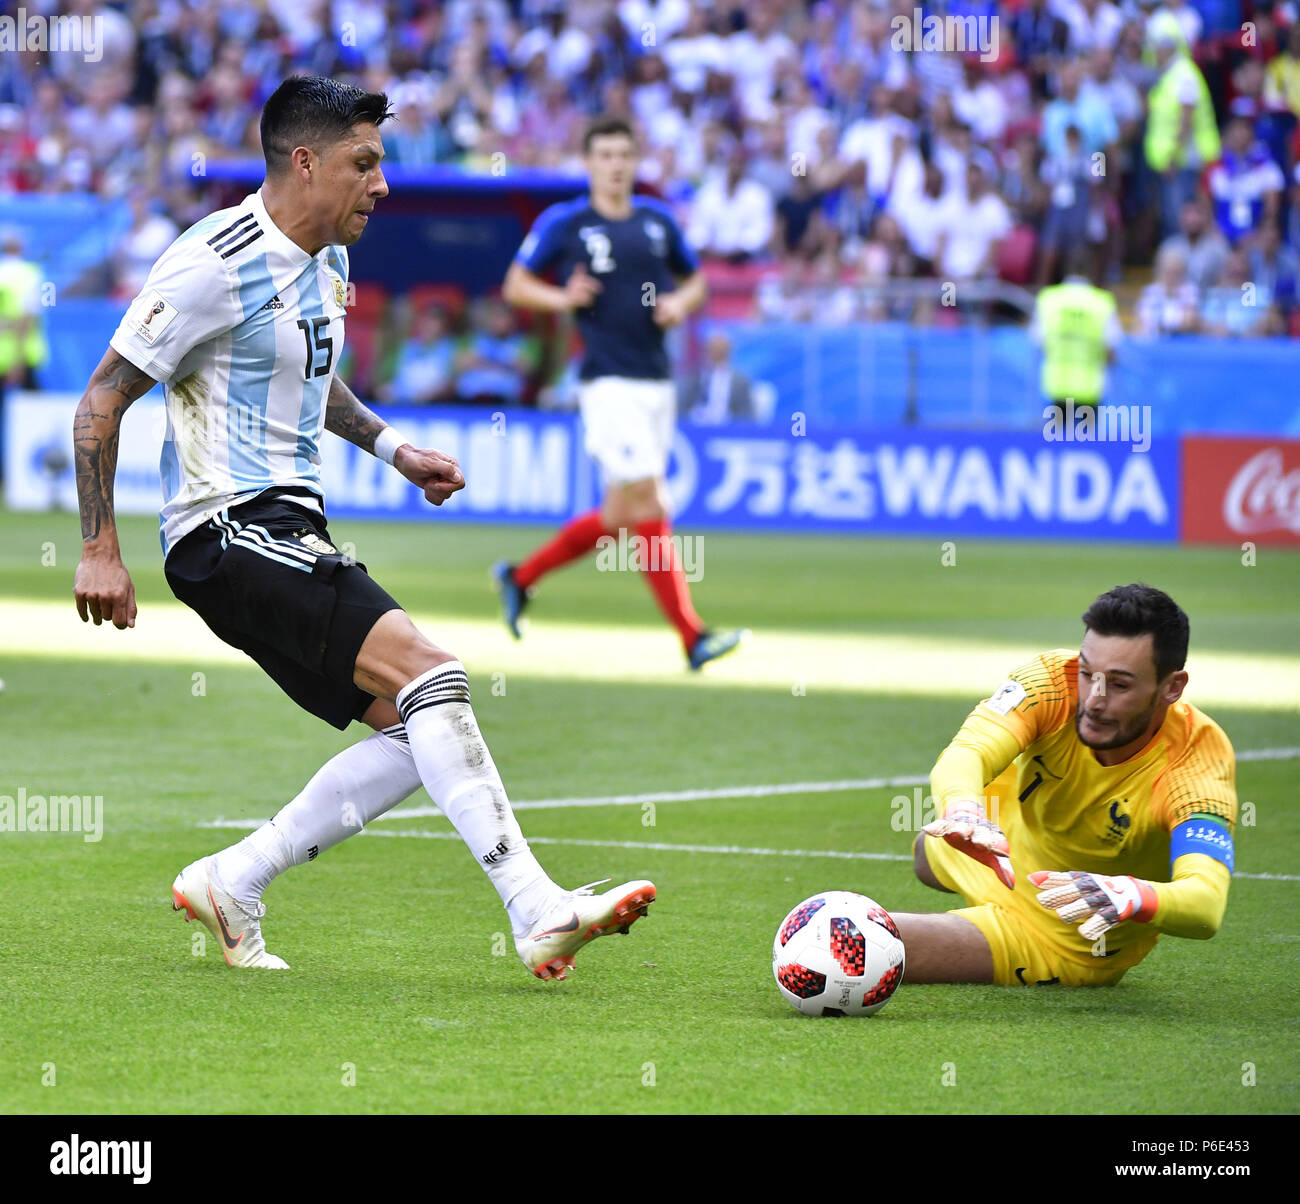 (180630) -- KAZAN, June 30, 2018 (Xinhua) -- Enzo Perez (L) of Argentina vies with goalkeeper Hugo Lloris of France during the 2018 FIFA World Cup round of 16 match between France and Argentina in Kazan, Russia, on June 30, 2018. (Xinhua/Chen Yichen) Stock Photo